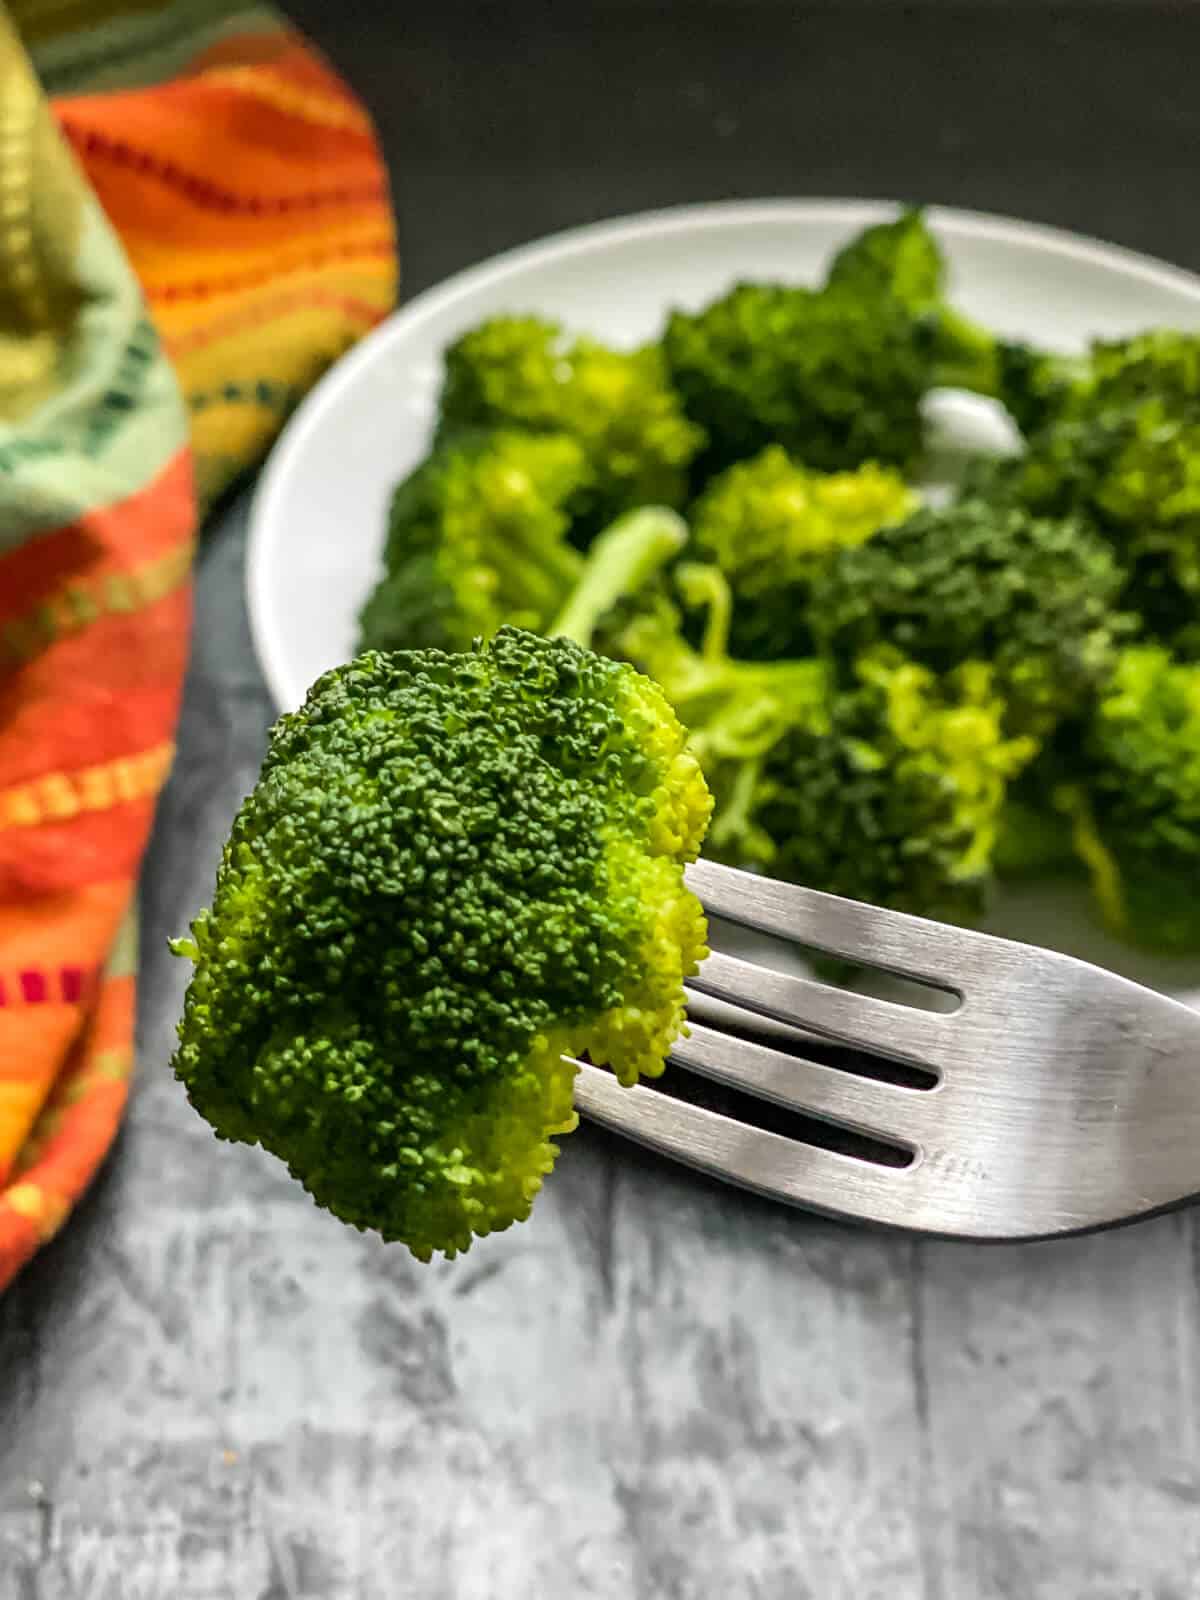 A silver fork with a broccoli floret and a plate of steamed broccoli in the back.